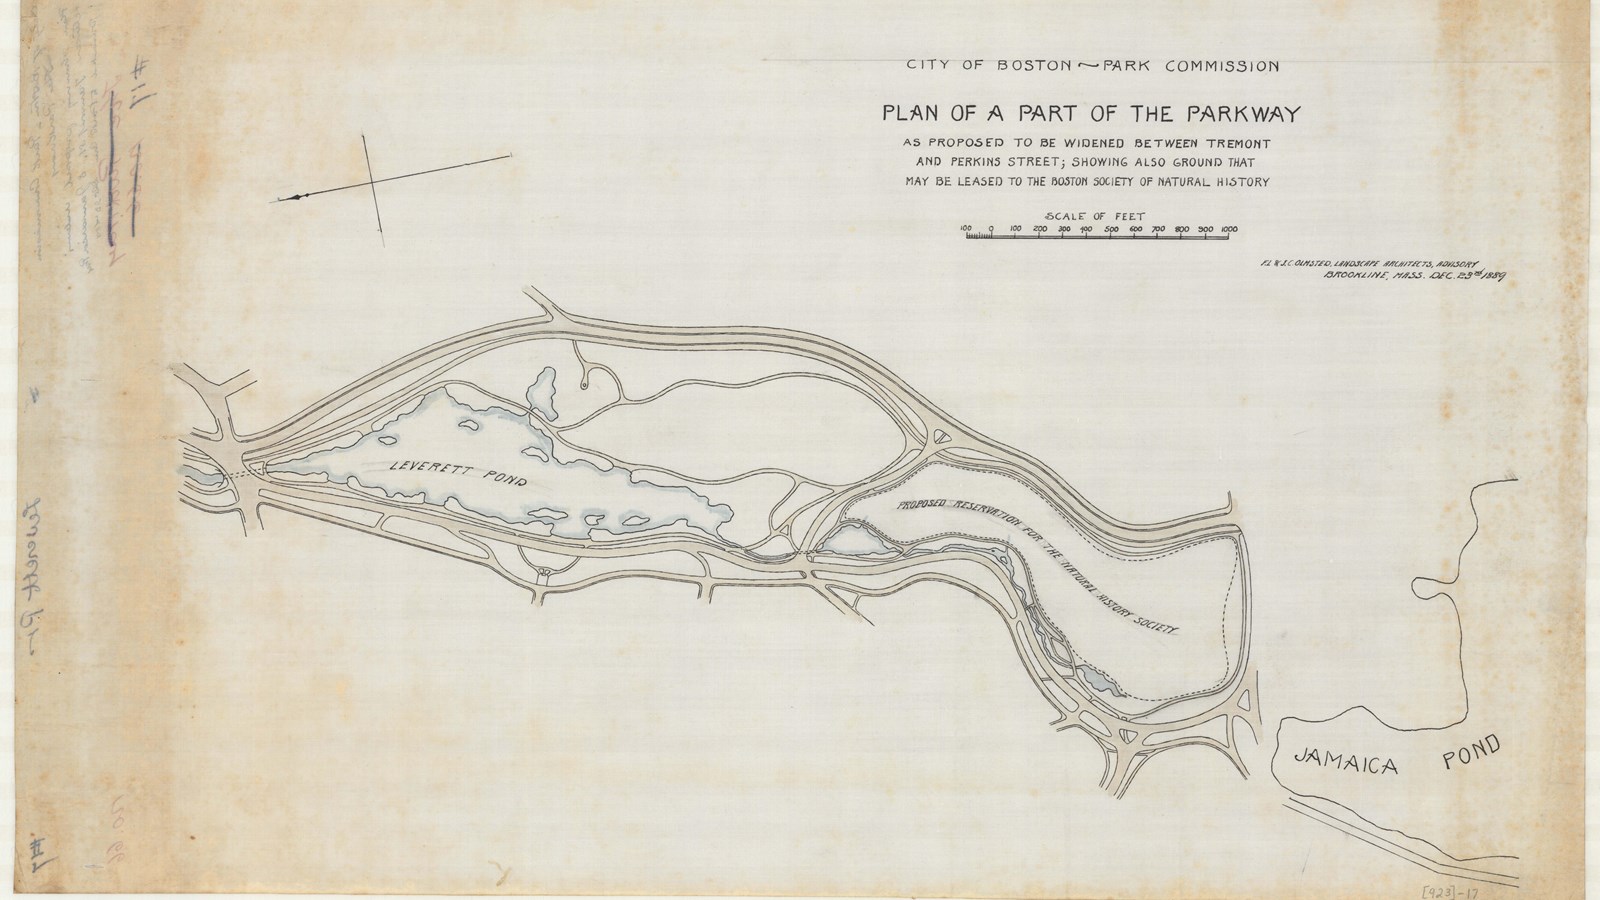 Pencil drawing of curving roads with Leverett Pond in middle with paths around it 